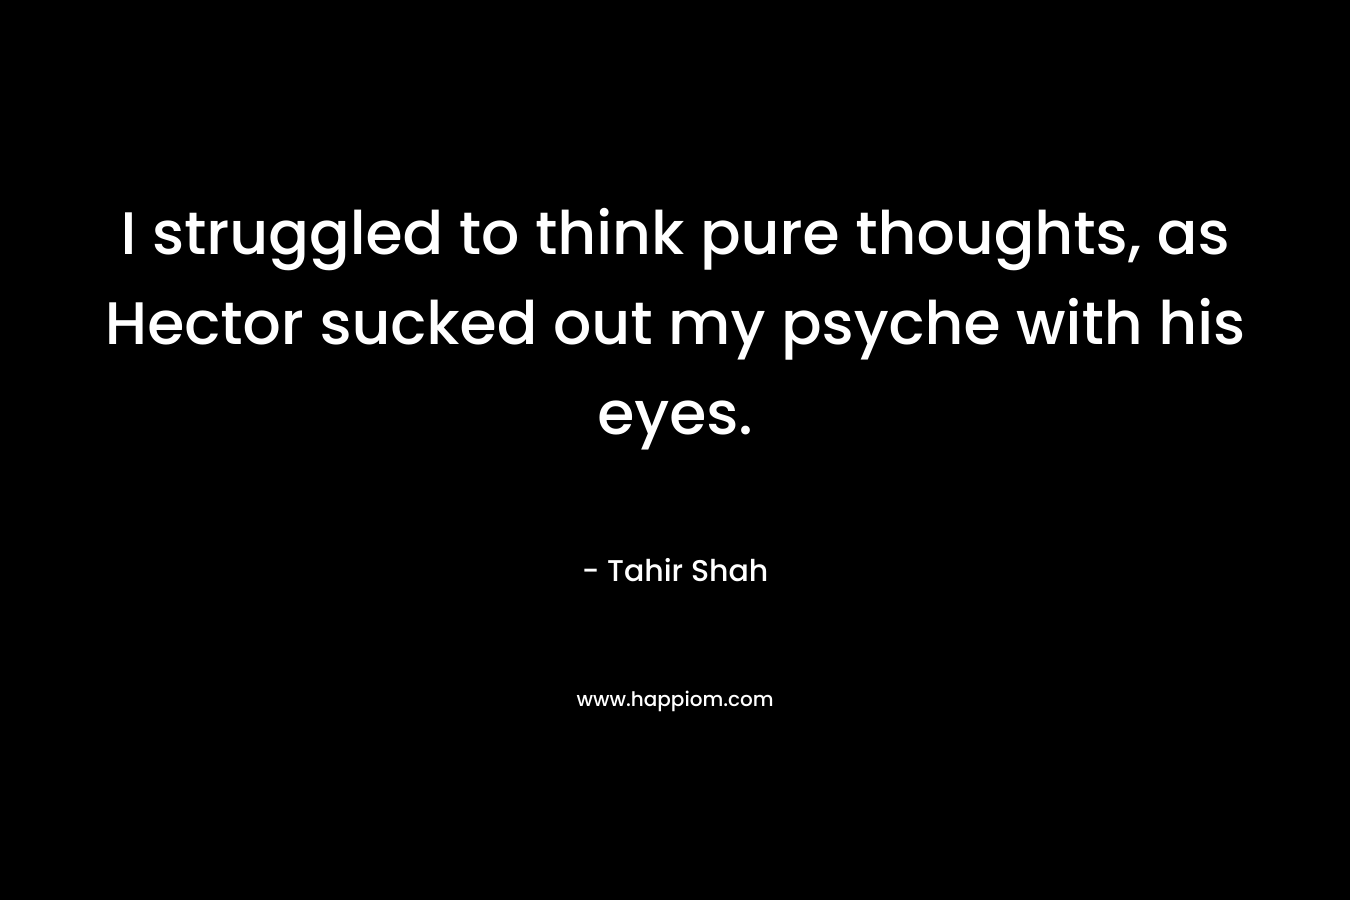 I struggled to think pure thoughts, as Hector sucked out my psyche with his eyes. – Tahir Shah